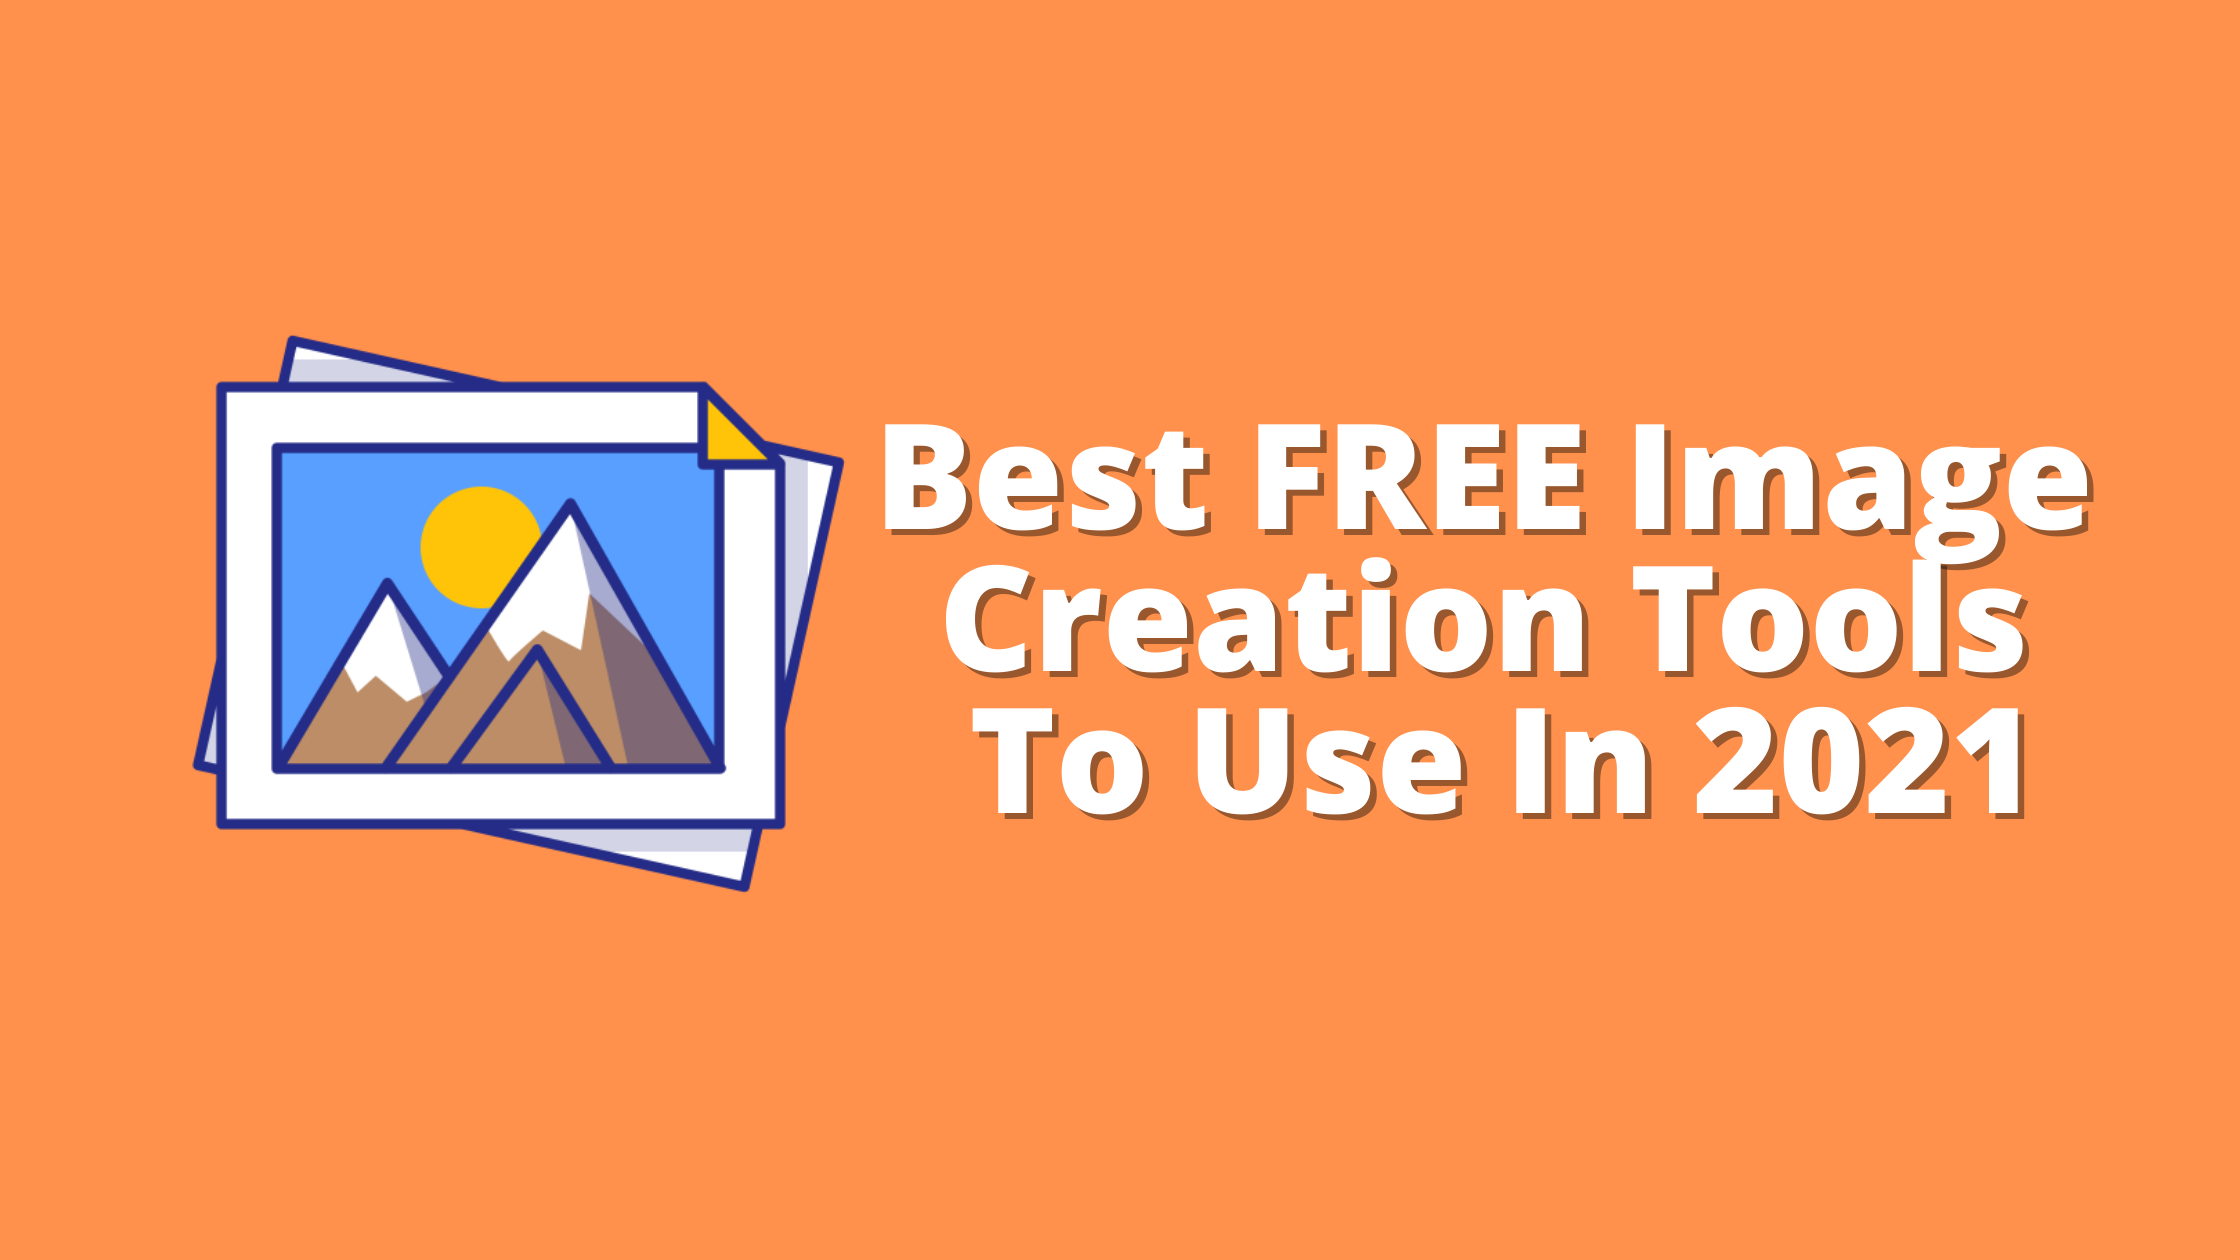 Best FREE Image Creation Tools To Use In 2021